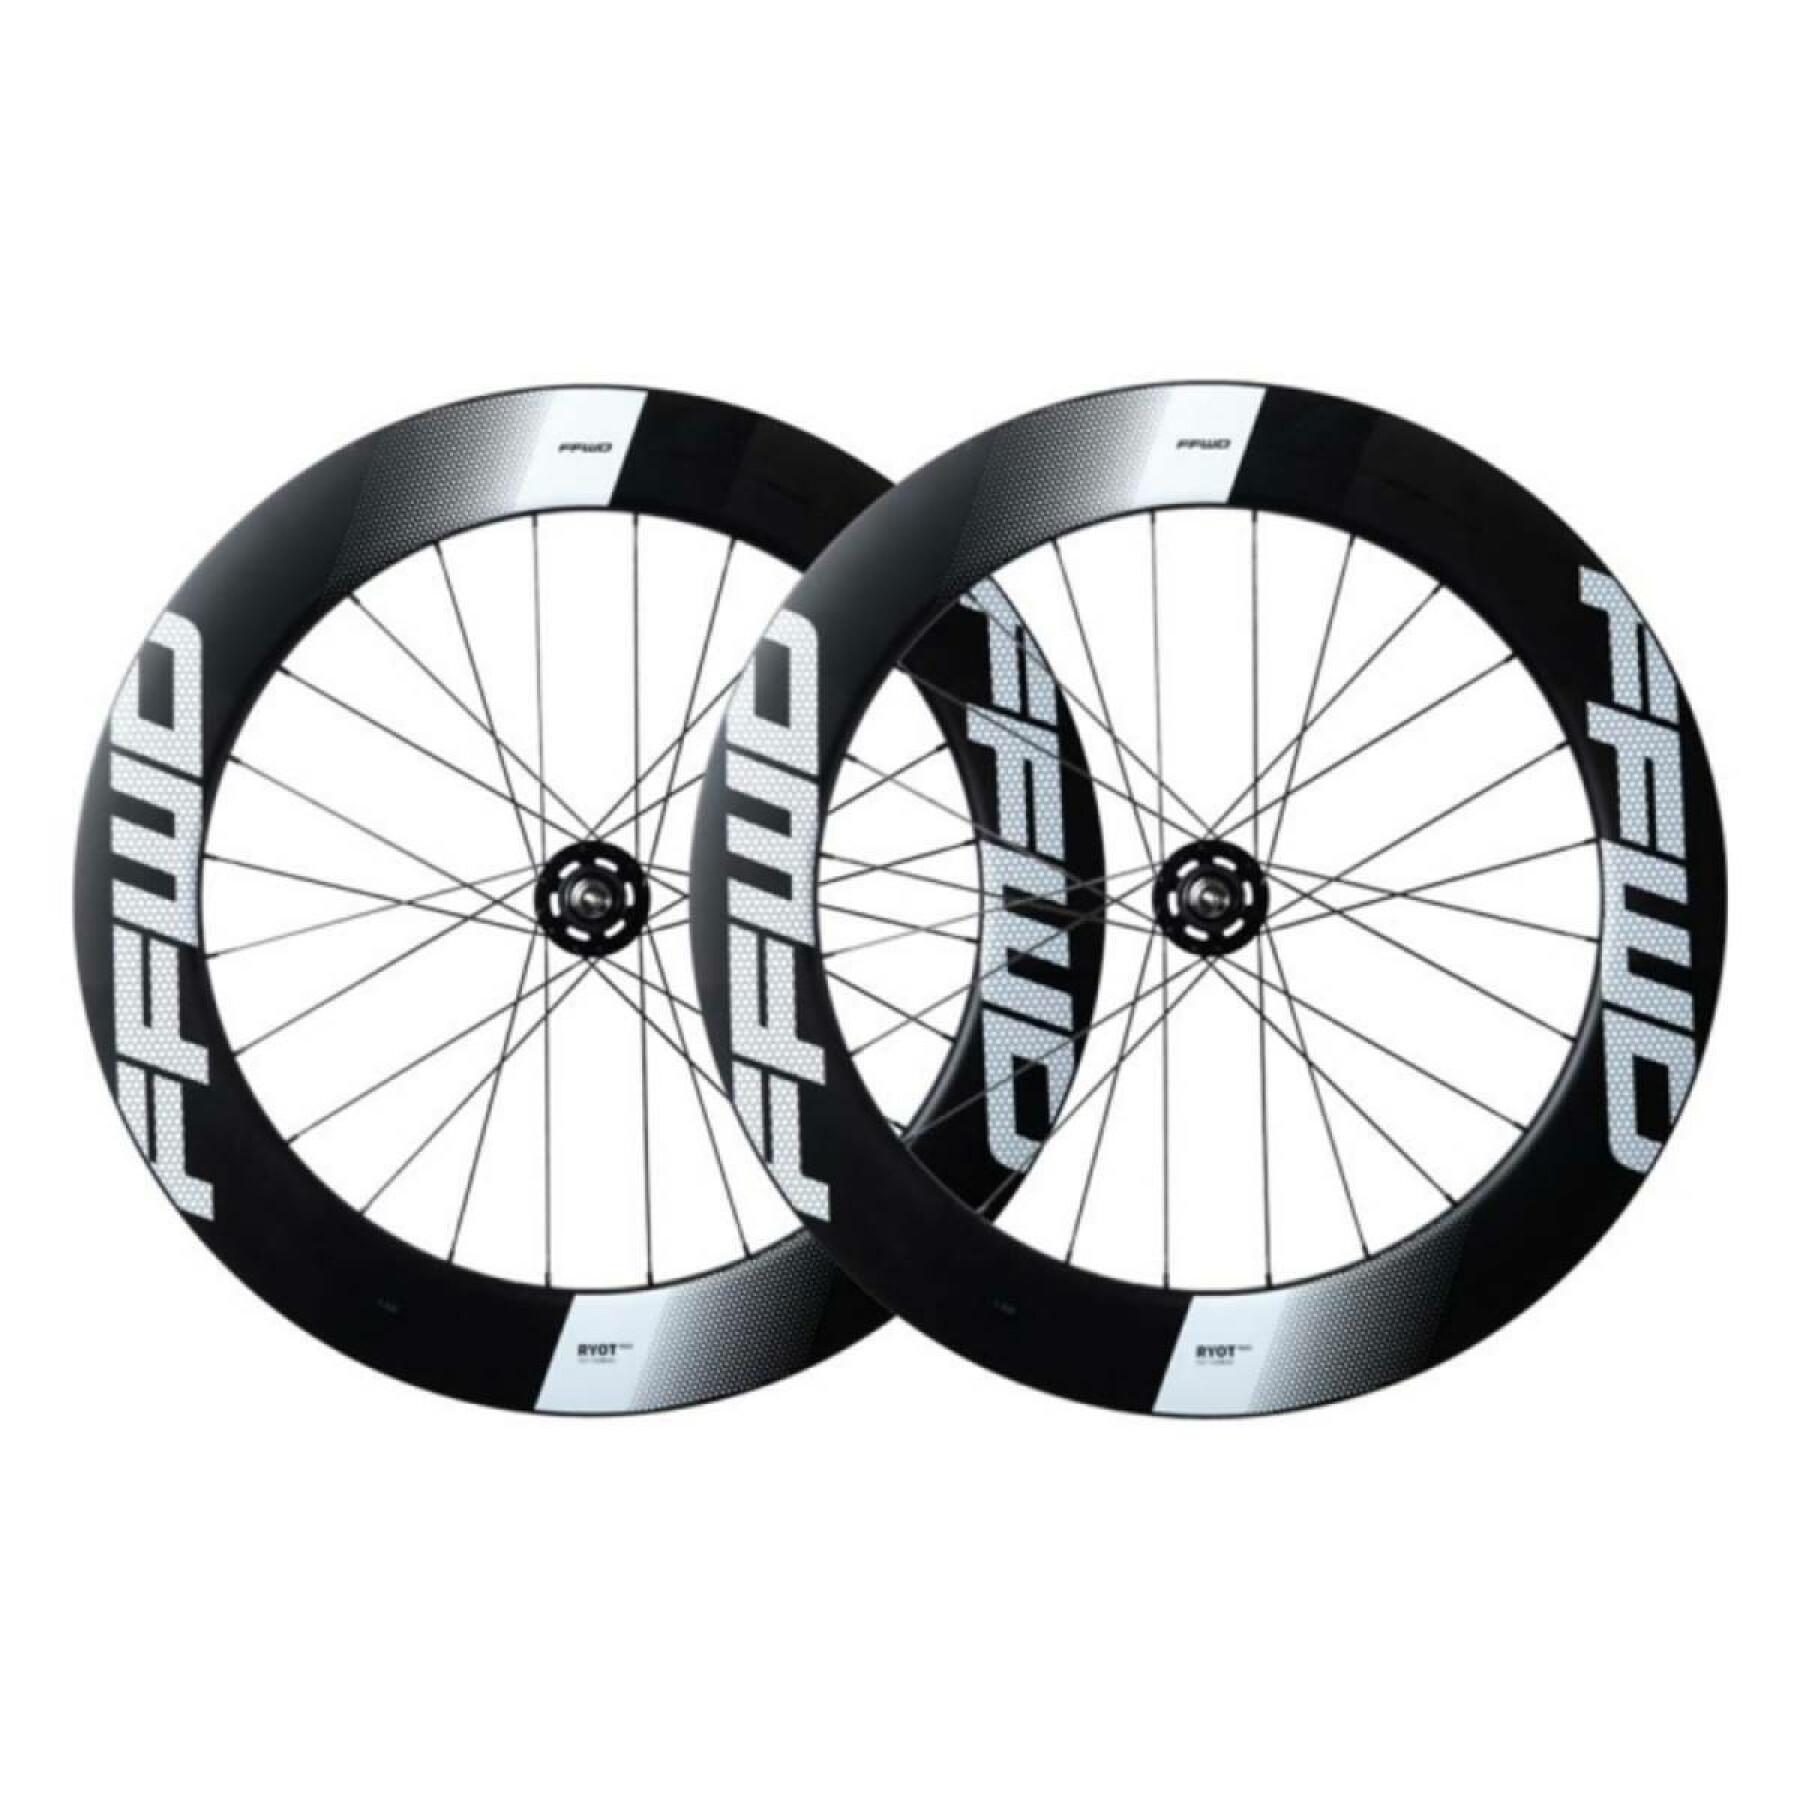 Pair of bicycle wheels with tubular hubs Fast Forward Ryot77 Track Ffwd